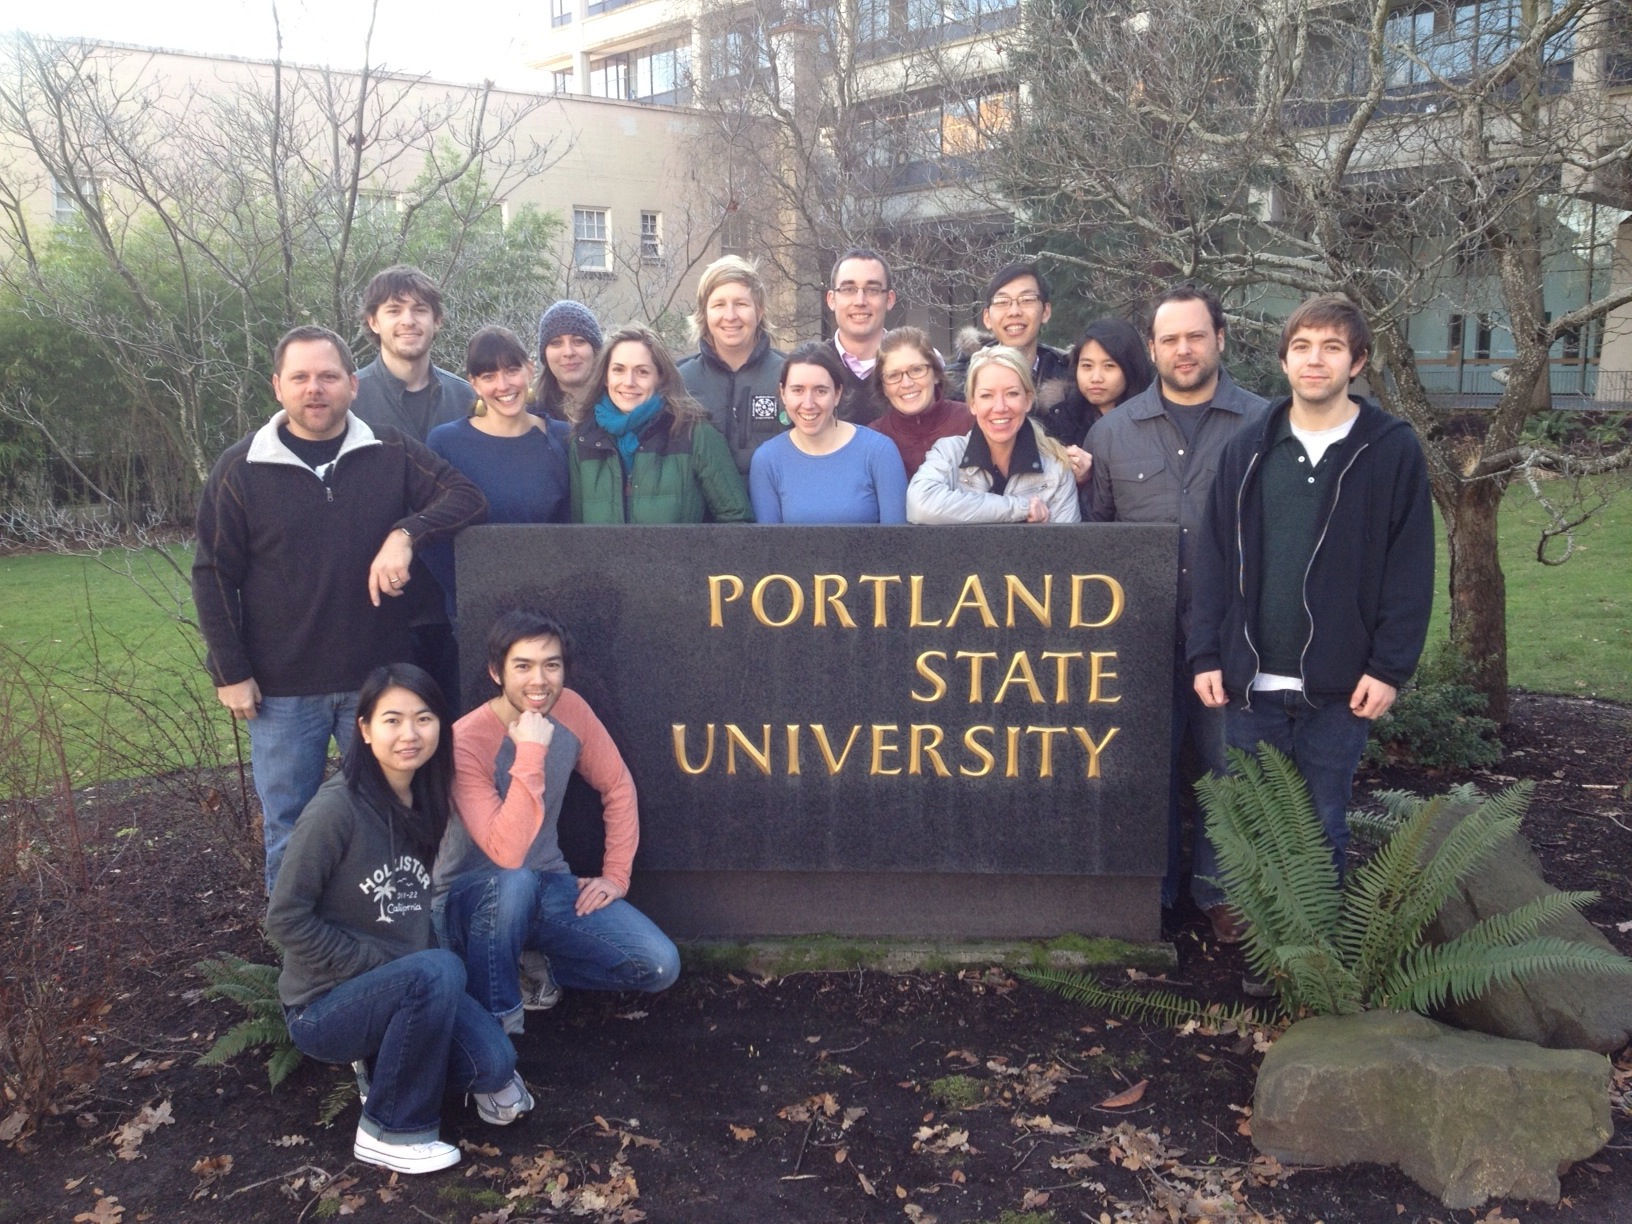 Photo of Podrabsky lab group from Winter 2012.